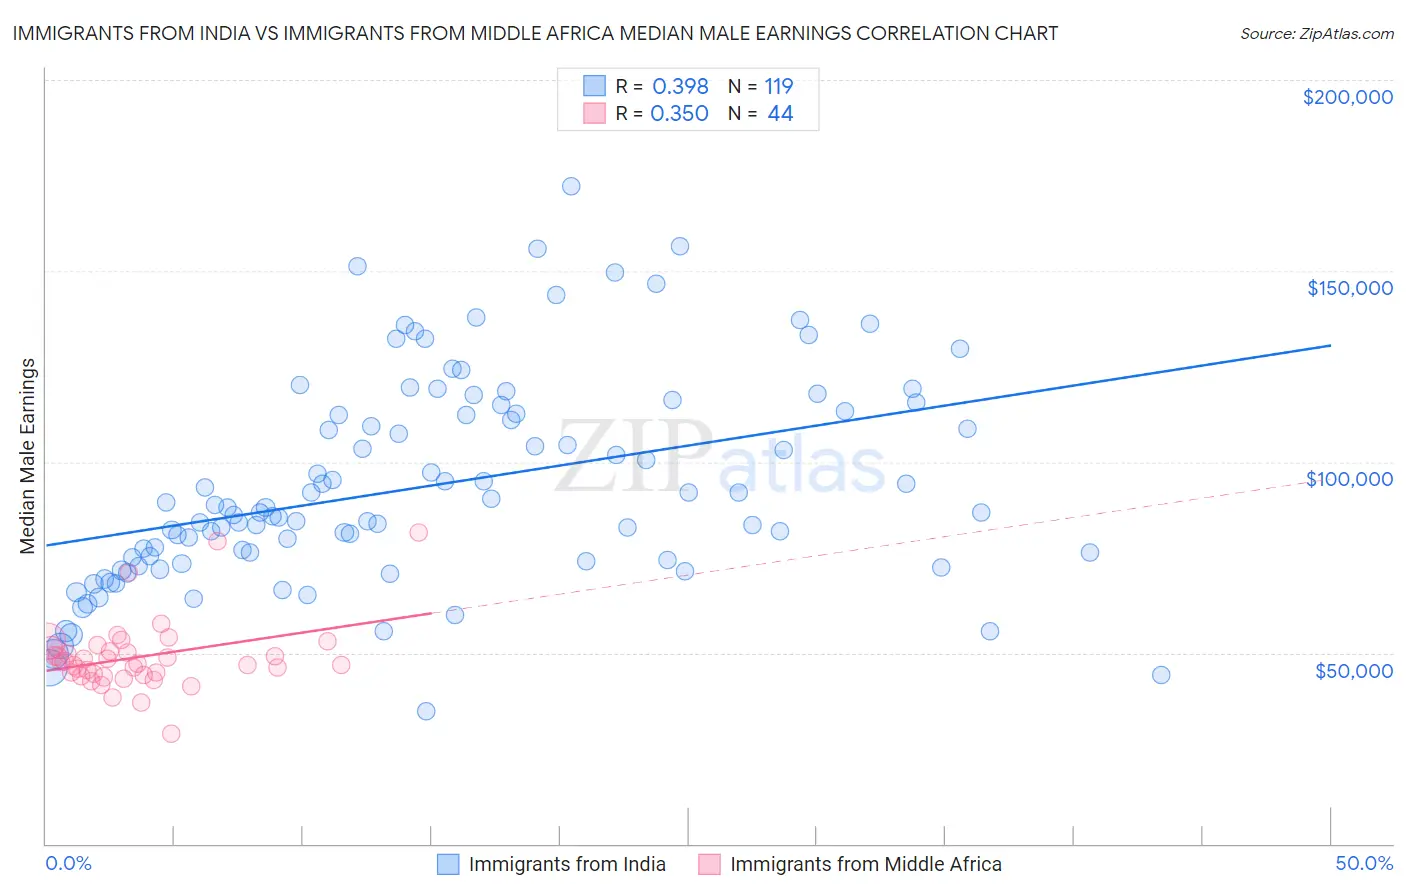 Immigrants from India vs Immigrants from Middle Africa Median Male Earnings